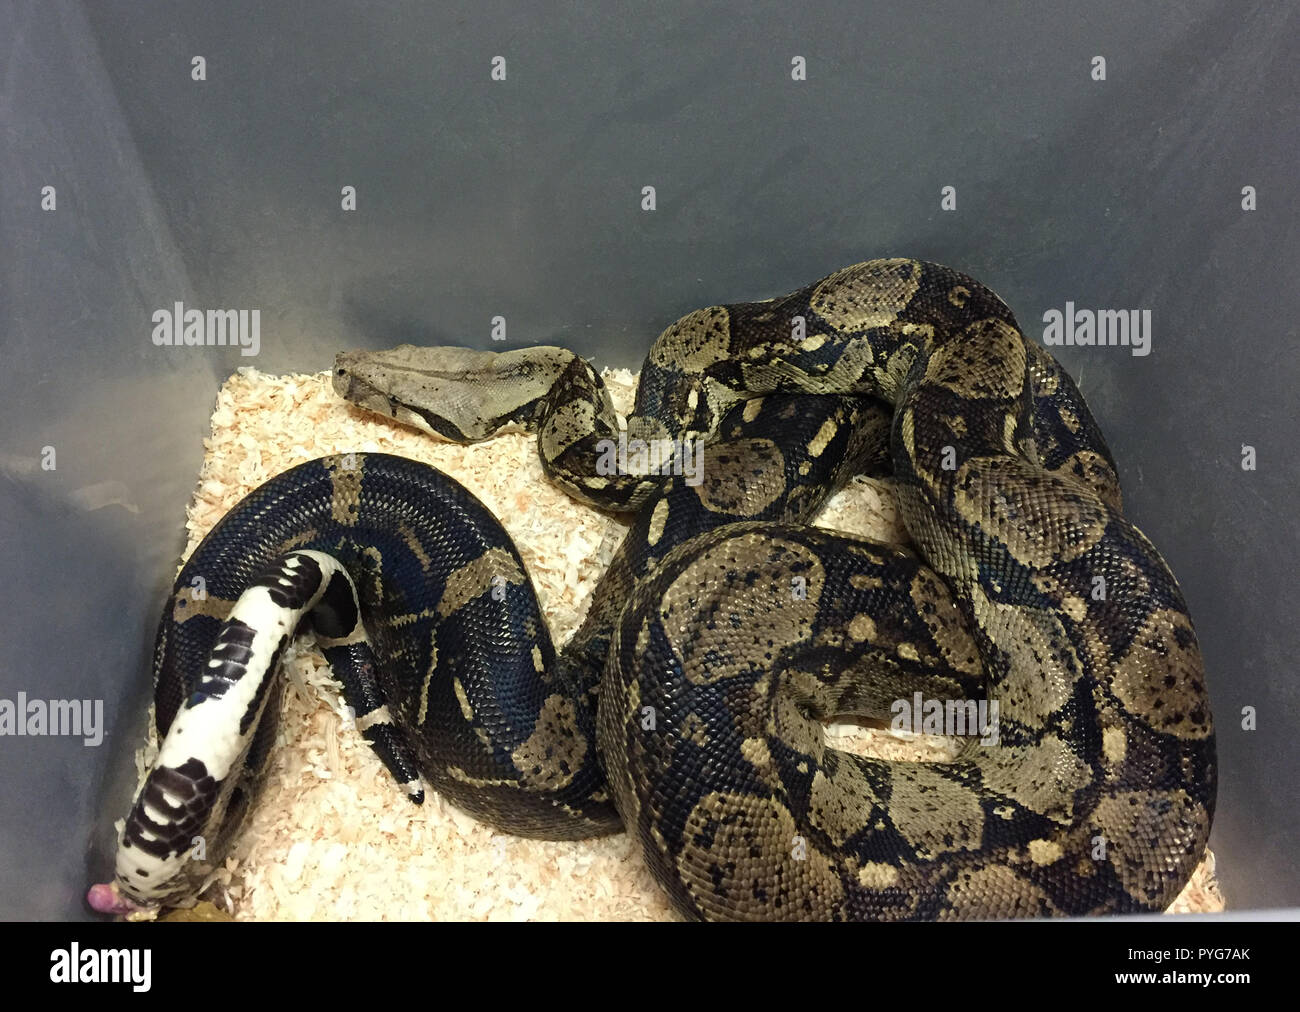 Man with a Giant Anaconda Around His Neck Stock Photo - Image of keeper,  : 128496020